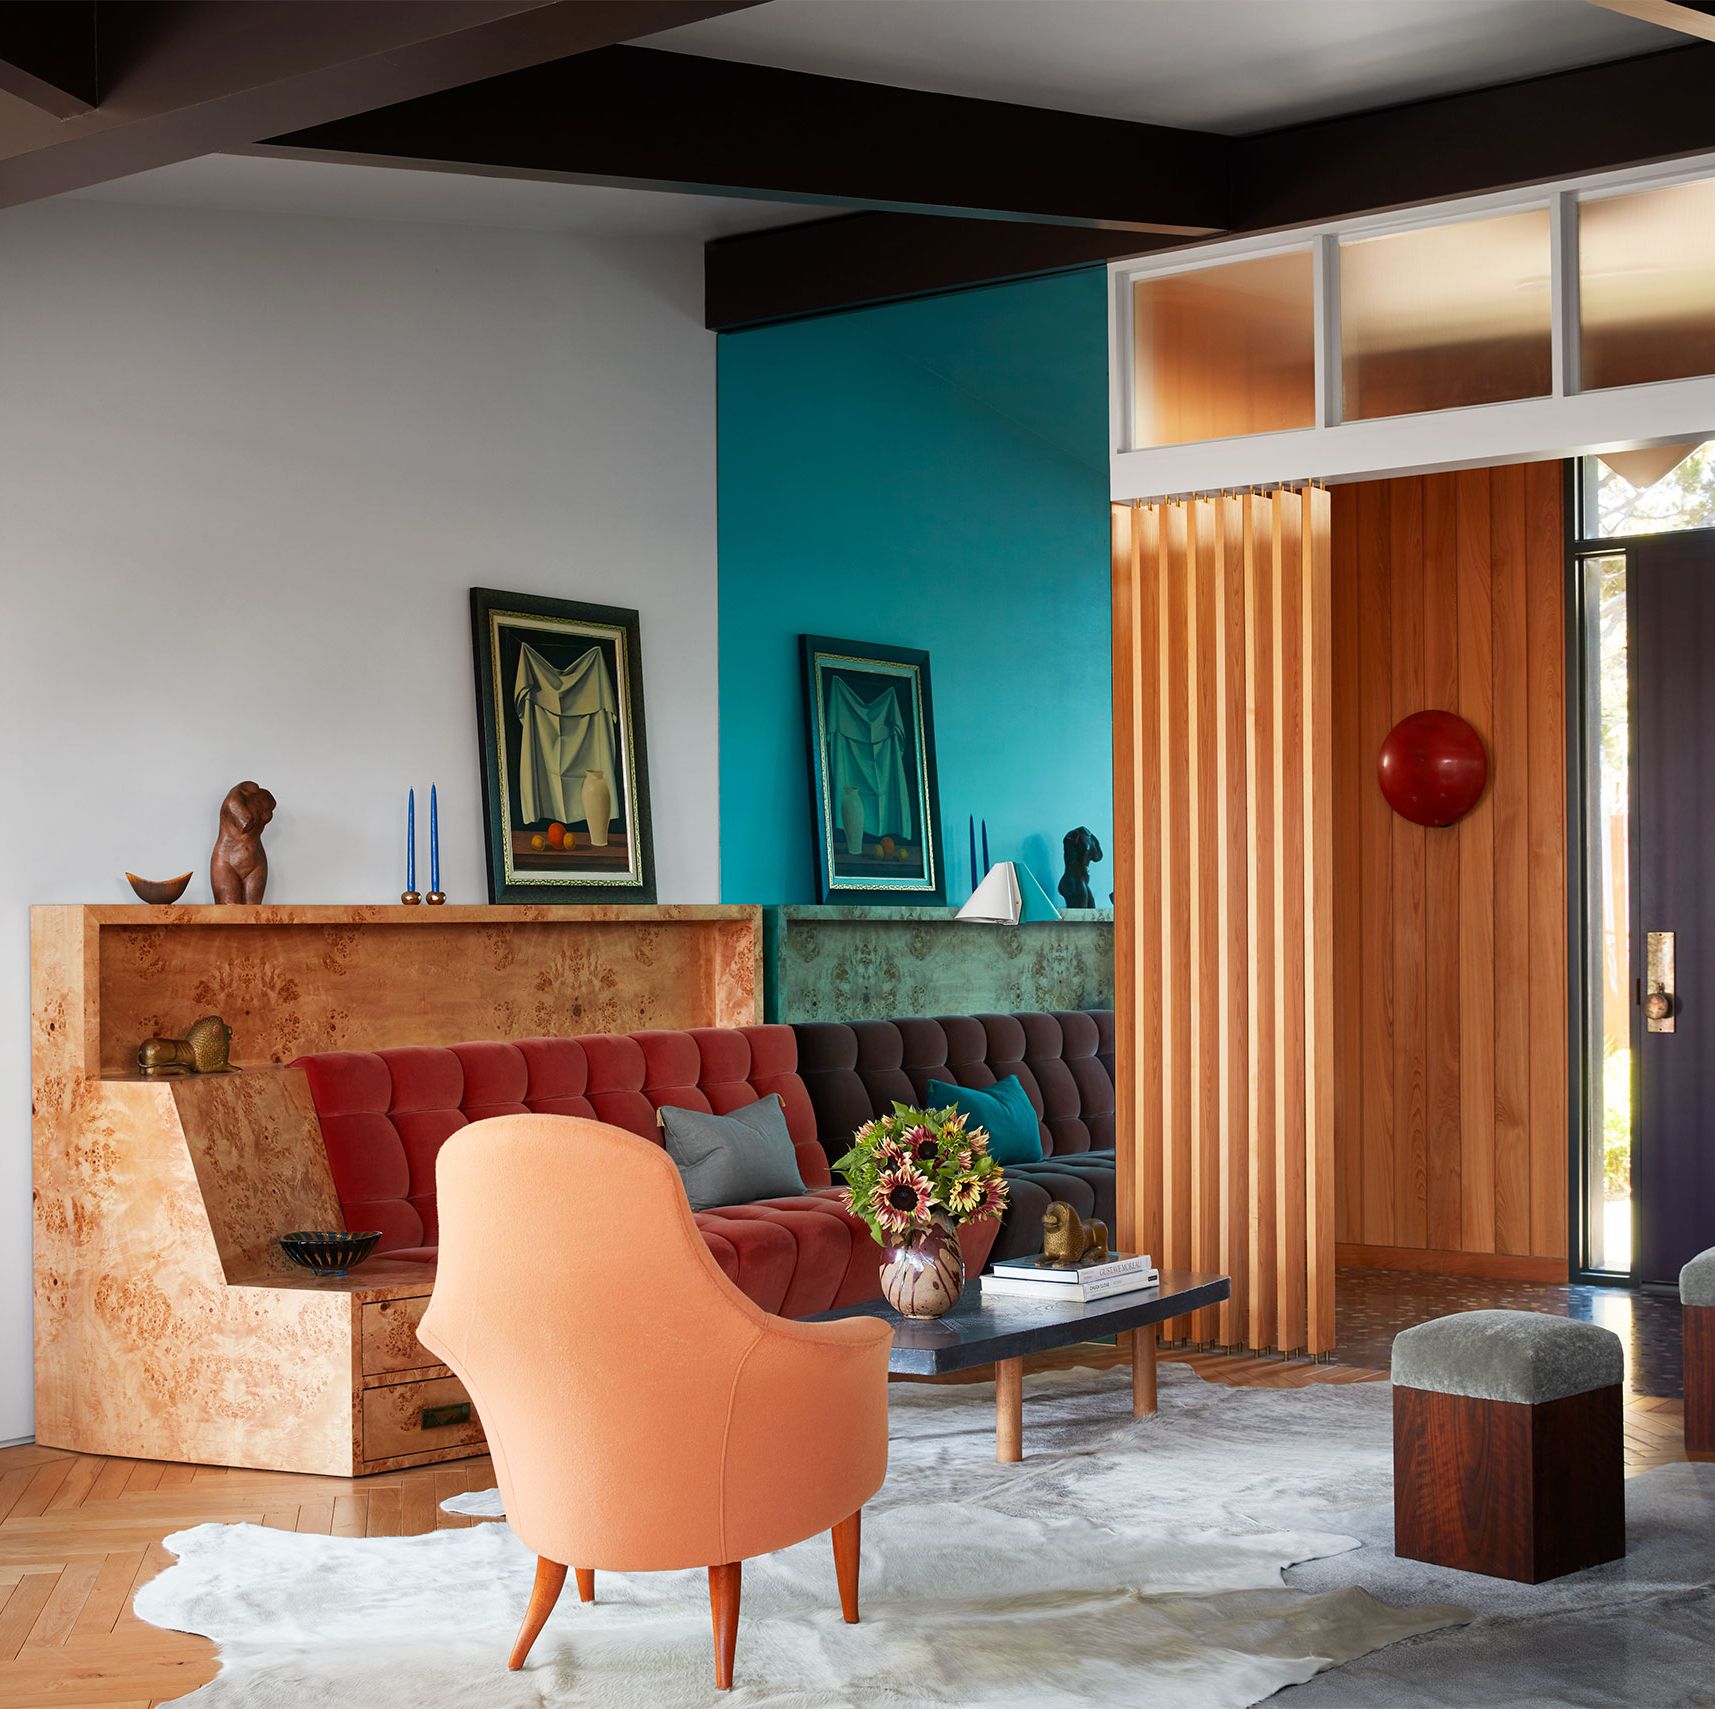 in a midcentury beach house living room is a bar  fronted with colored tiles, a sofa with a burl wood frame and tufted terra cotta cushions, two modern chairs, cocktail table, too stools, and a cow hide rug